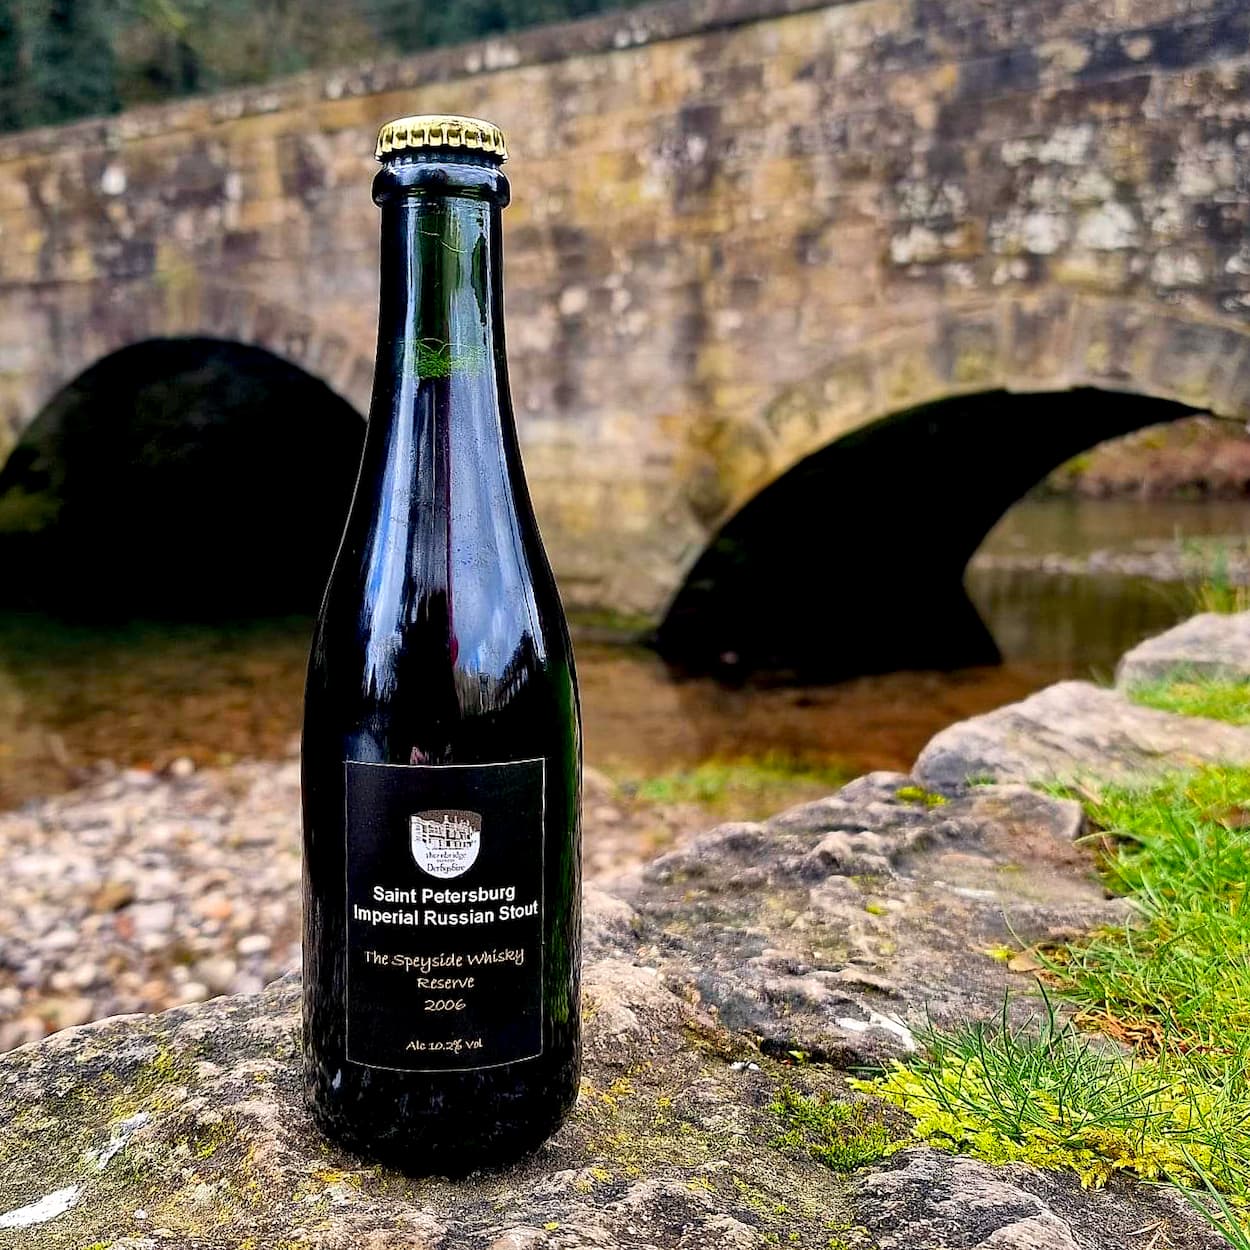 St Petersburg Speyside Whisky Barrel Aged, 10.2% Imperial Russian Stout aged for 10 months in Spey whisky casks Beer - Cellar Reserve Thornbridge